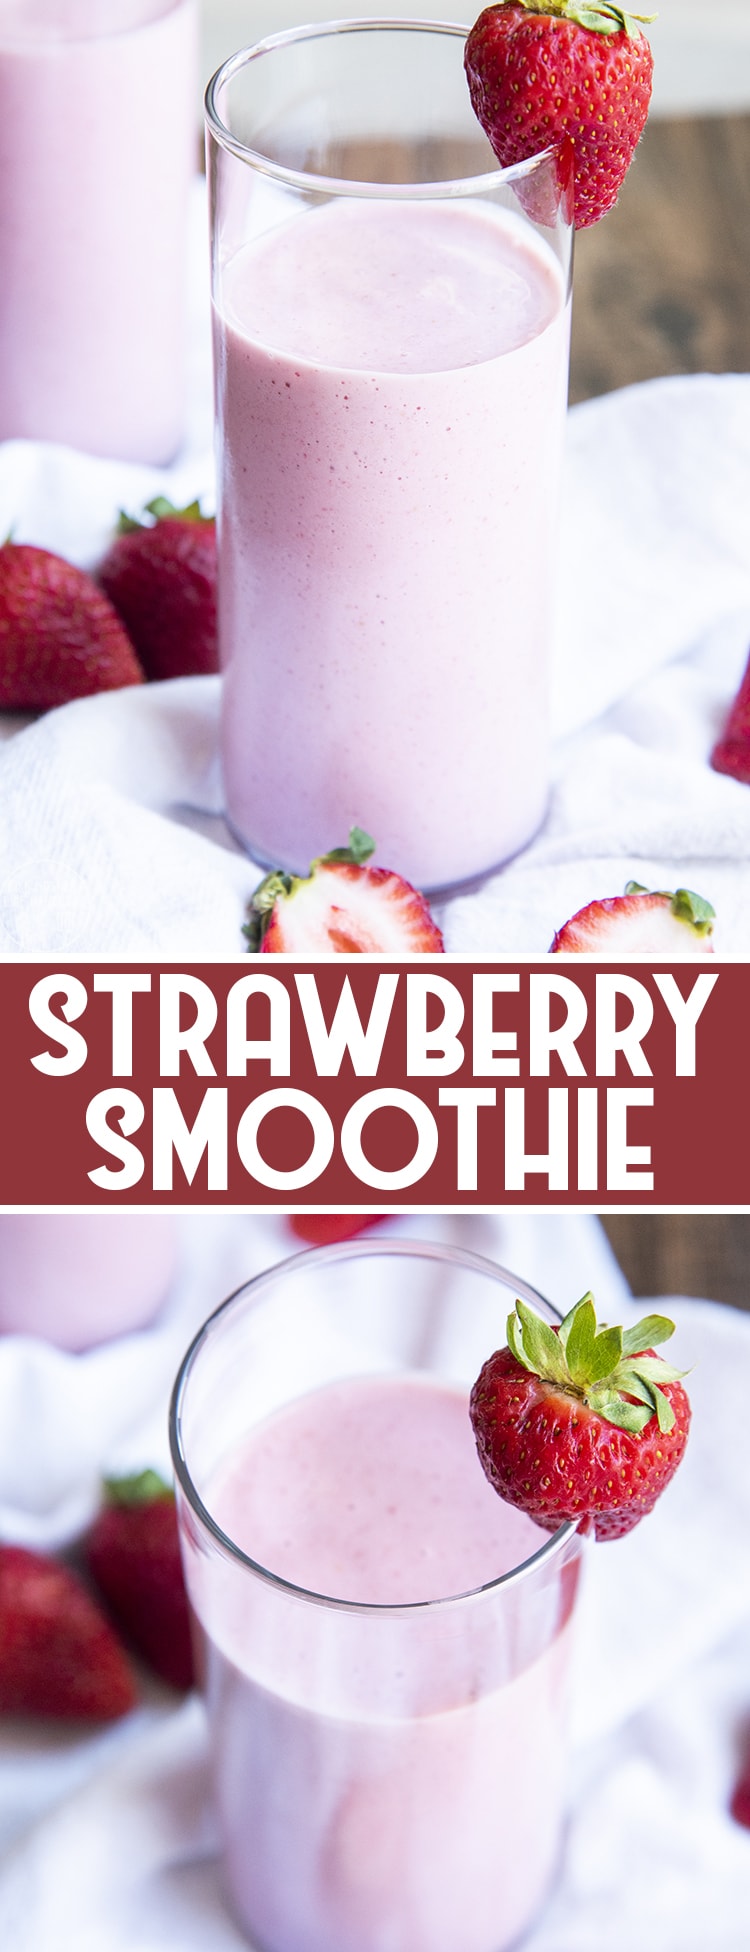 2 image collage of strawberry yogurt smoothie with close up and above shots with title card between.